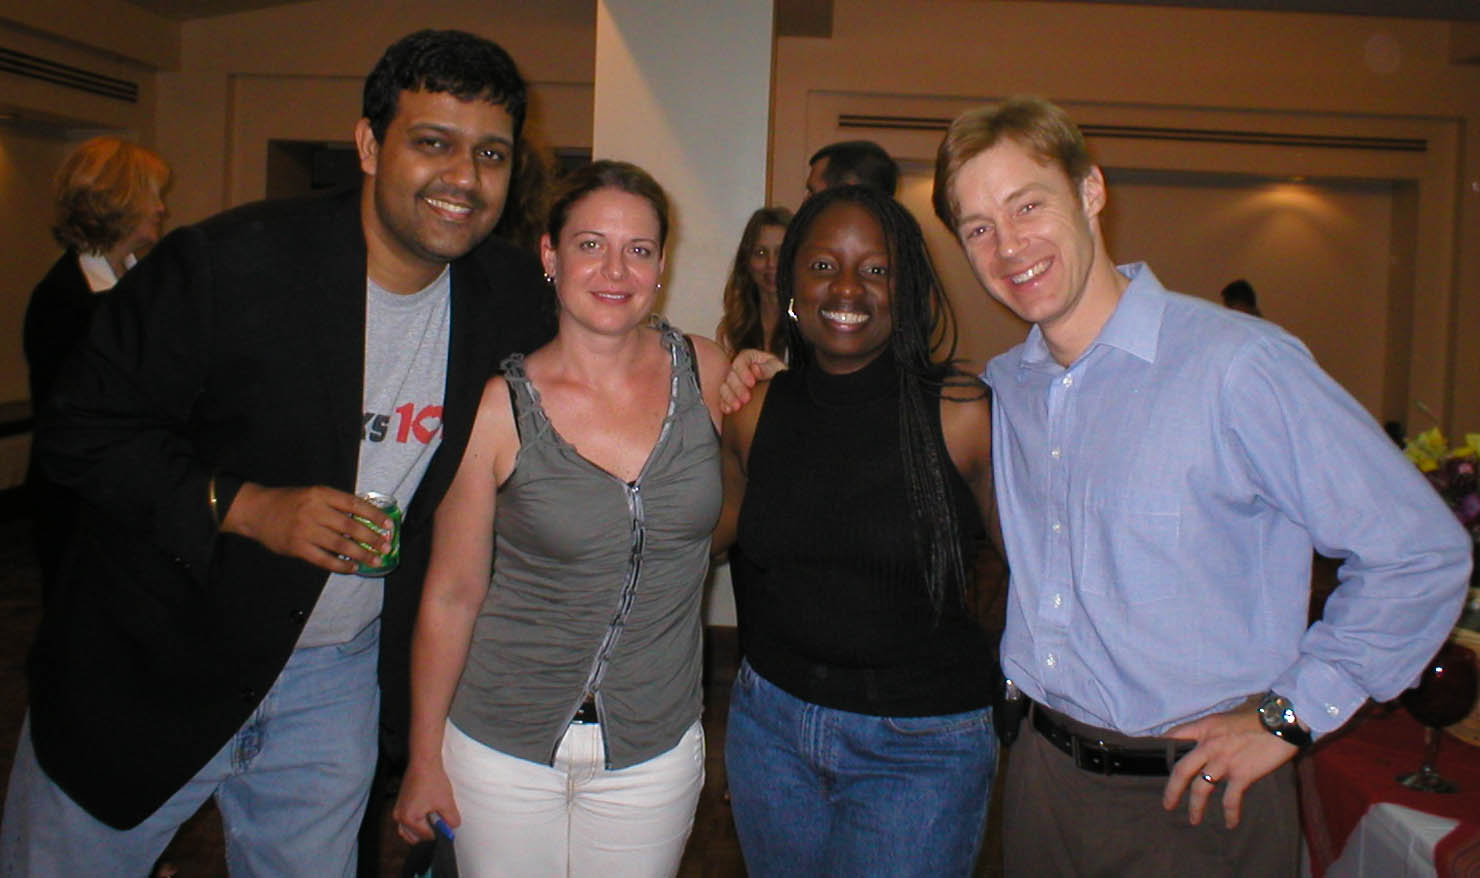 Angela at the viewing of Chicks 101 with director Lovinder Gill and actors Kate Leahey and R. Keith Harris.